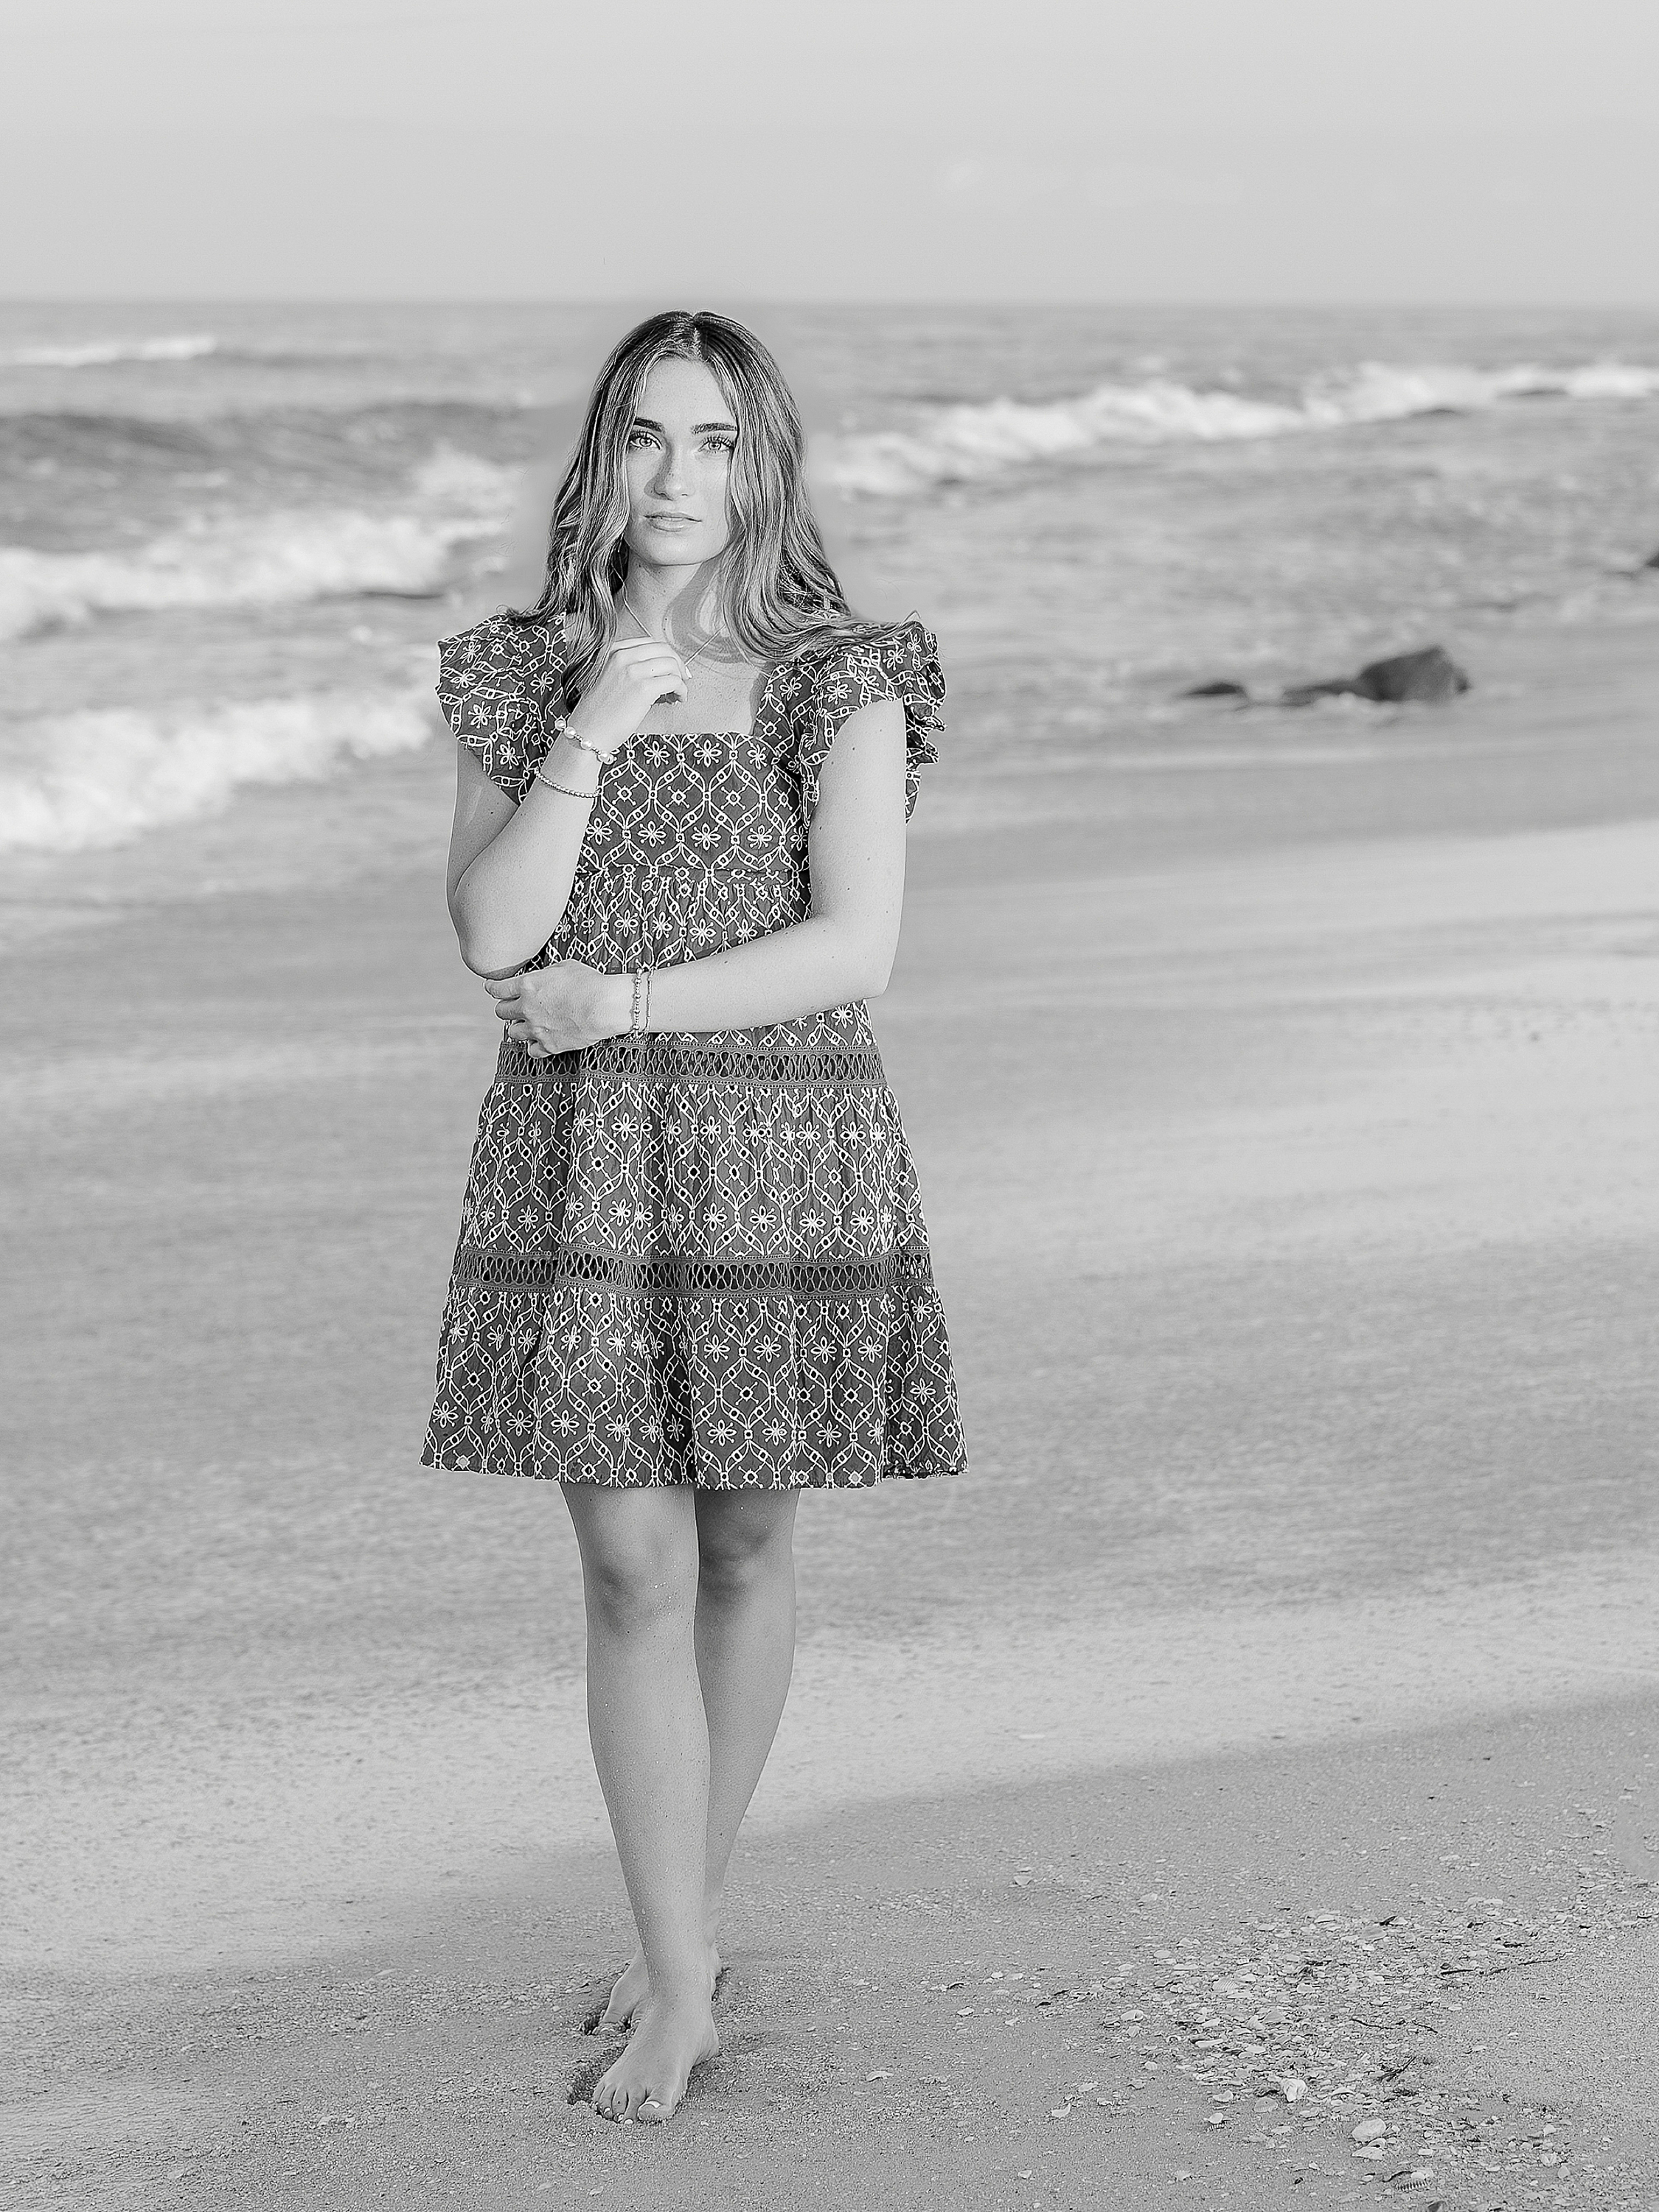 Black and white portrait of St. Johns County graduate at the beach.